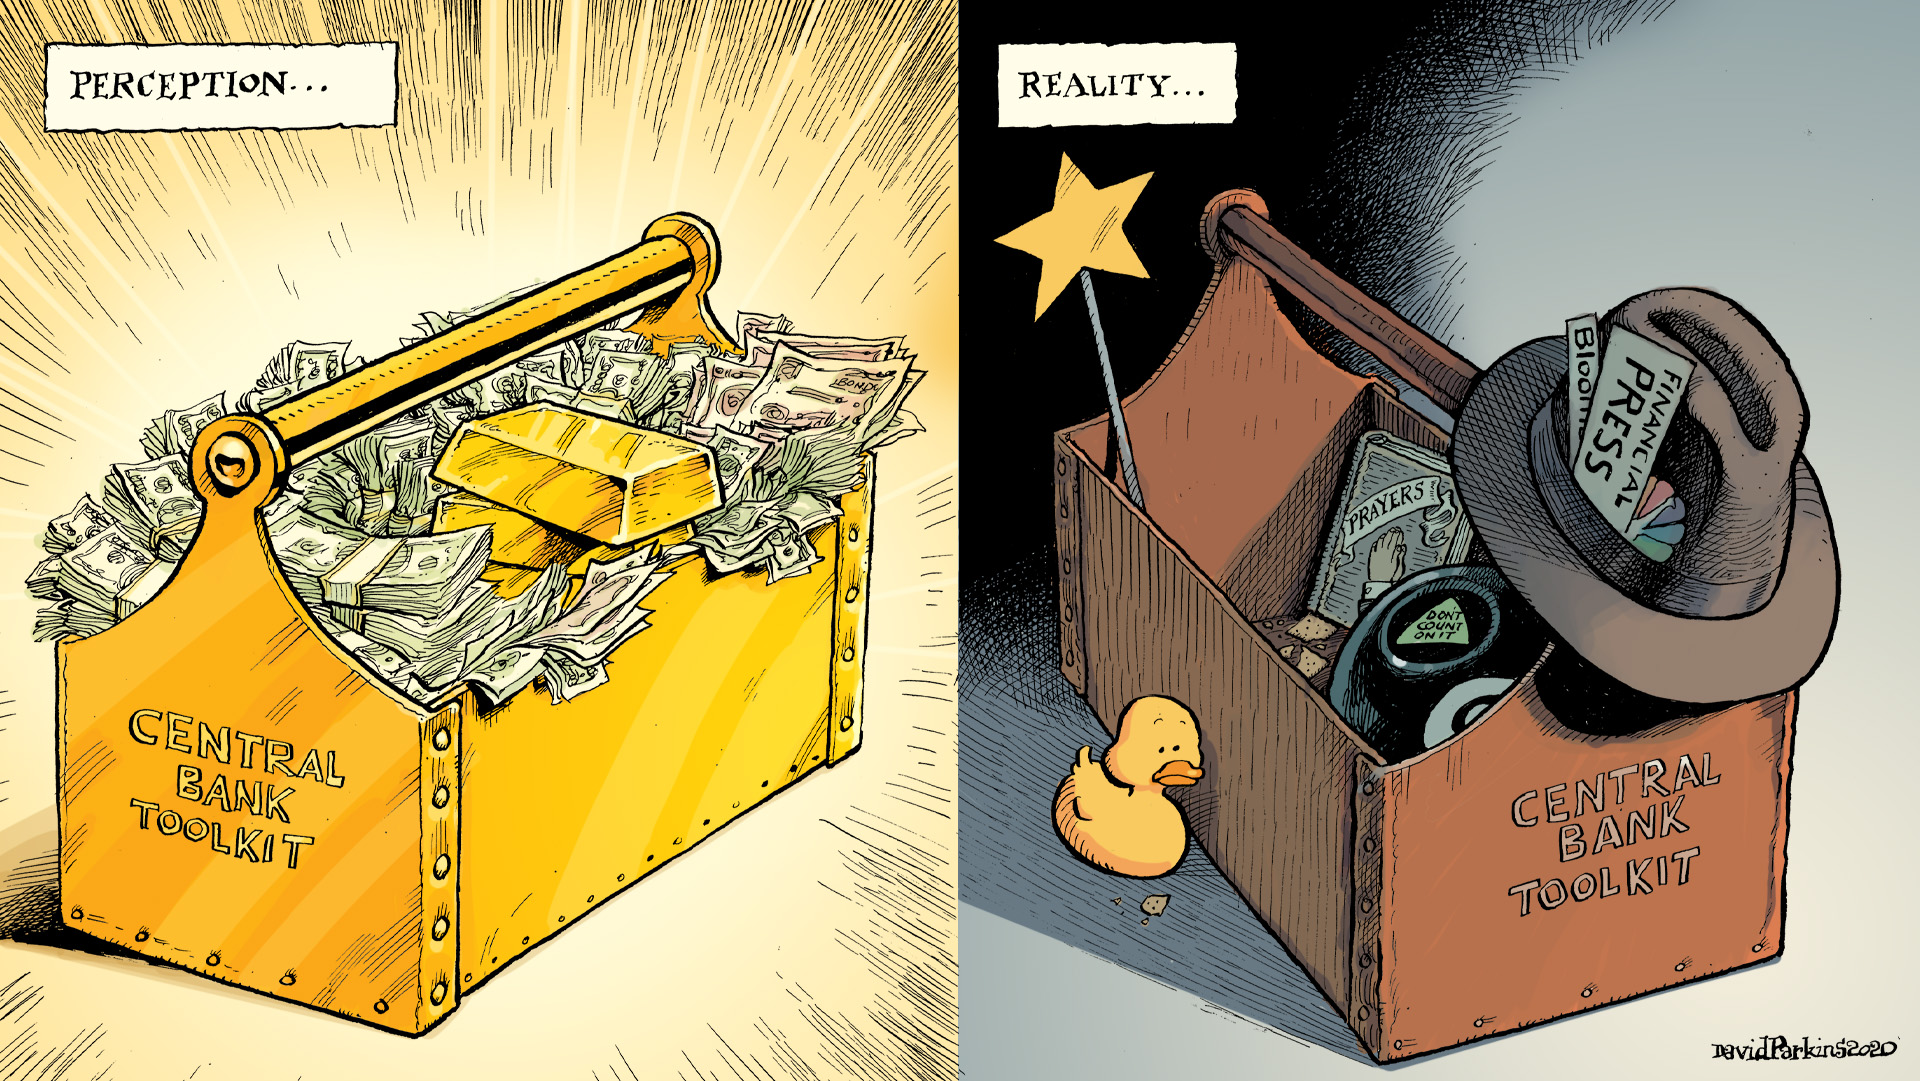 Central Bank Toolkit:  Perception vs. Reality